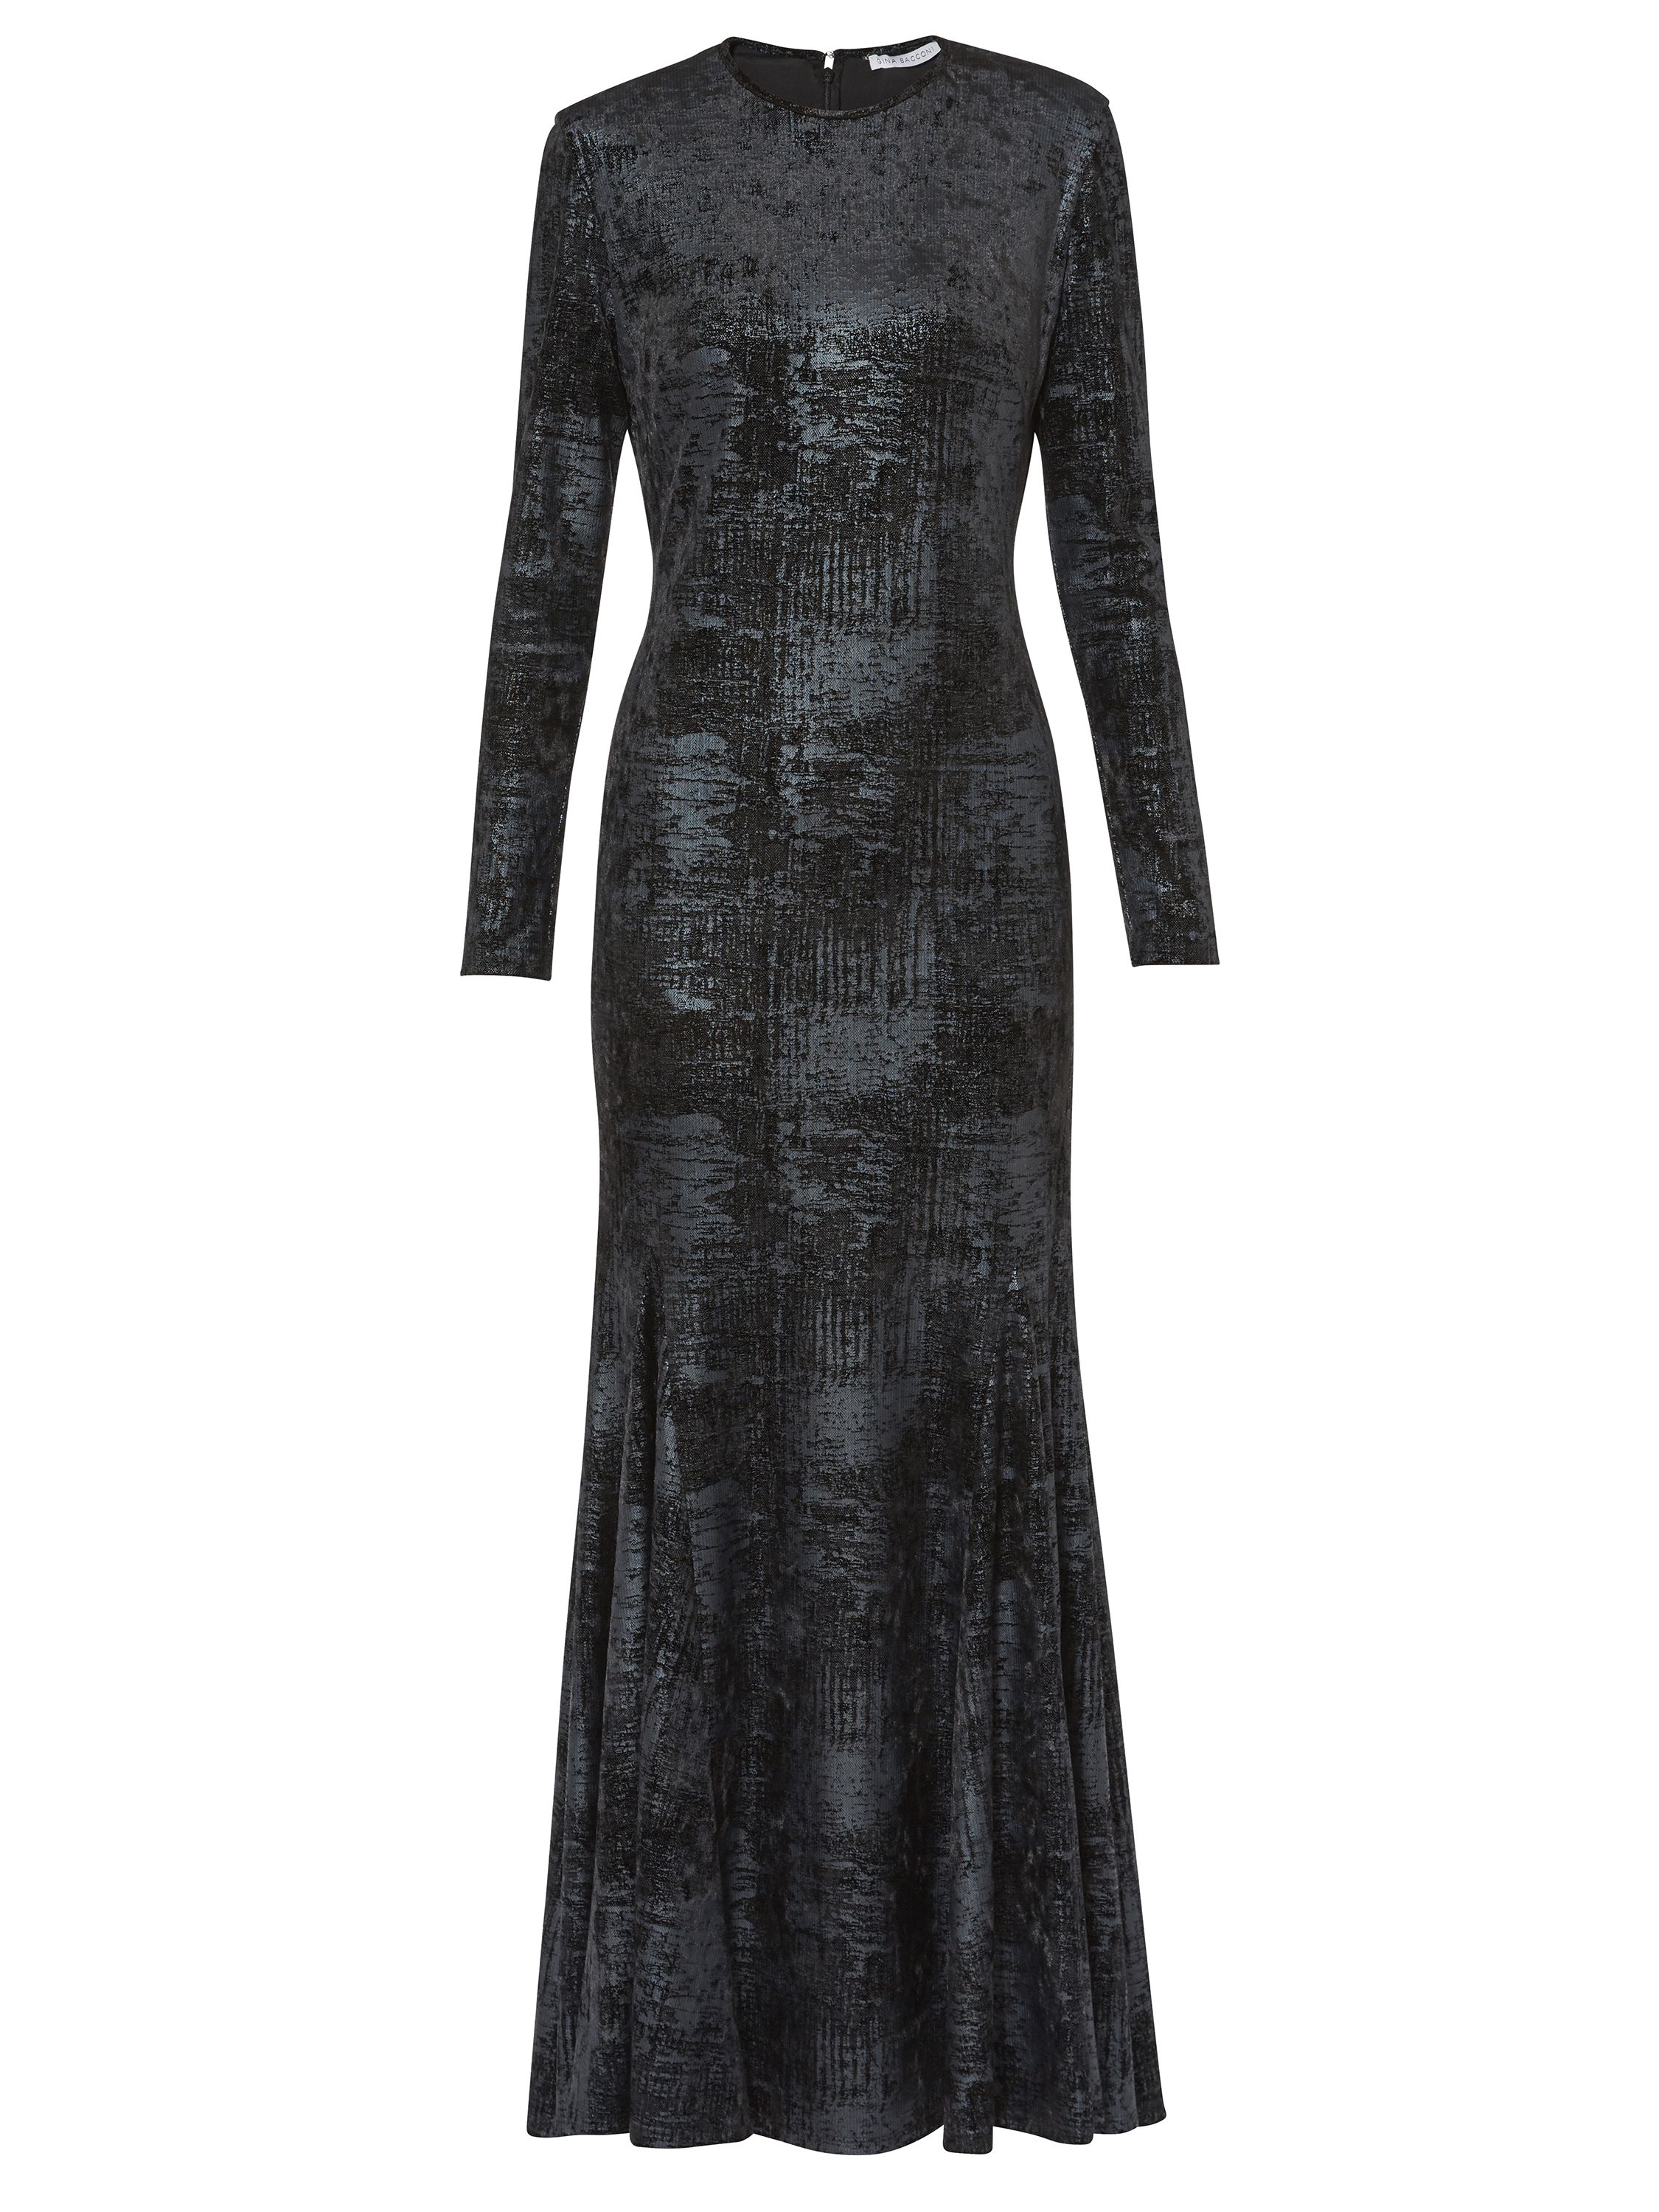 Feel classy in this elegant check velvet dress by Gina Bacconi. A sophisticated maxi dress constructed from patterned crushed velvet, this dress is perfect for a party or special occasion. A flared hem and a fitted waist makes for a flattering silhouette. With a round neck and long sleeves to complete this piece. This dress is fastened with a concealed zip and hook and eye detail.